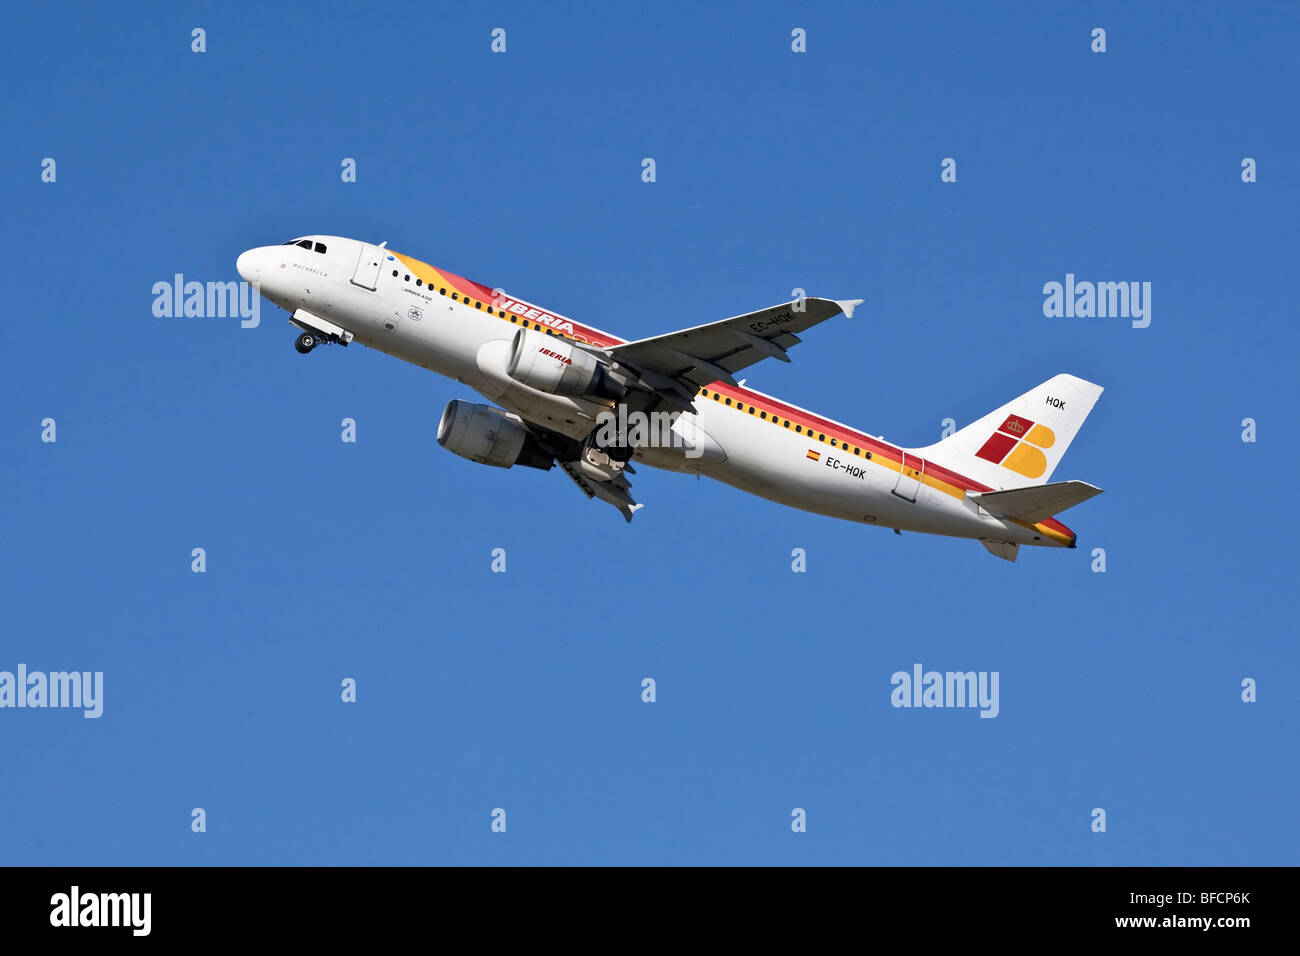 An Airbus A320 of the Spanish airline Iberia on take off Stock Photo